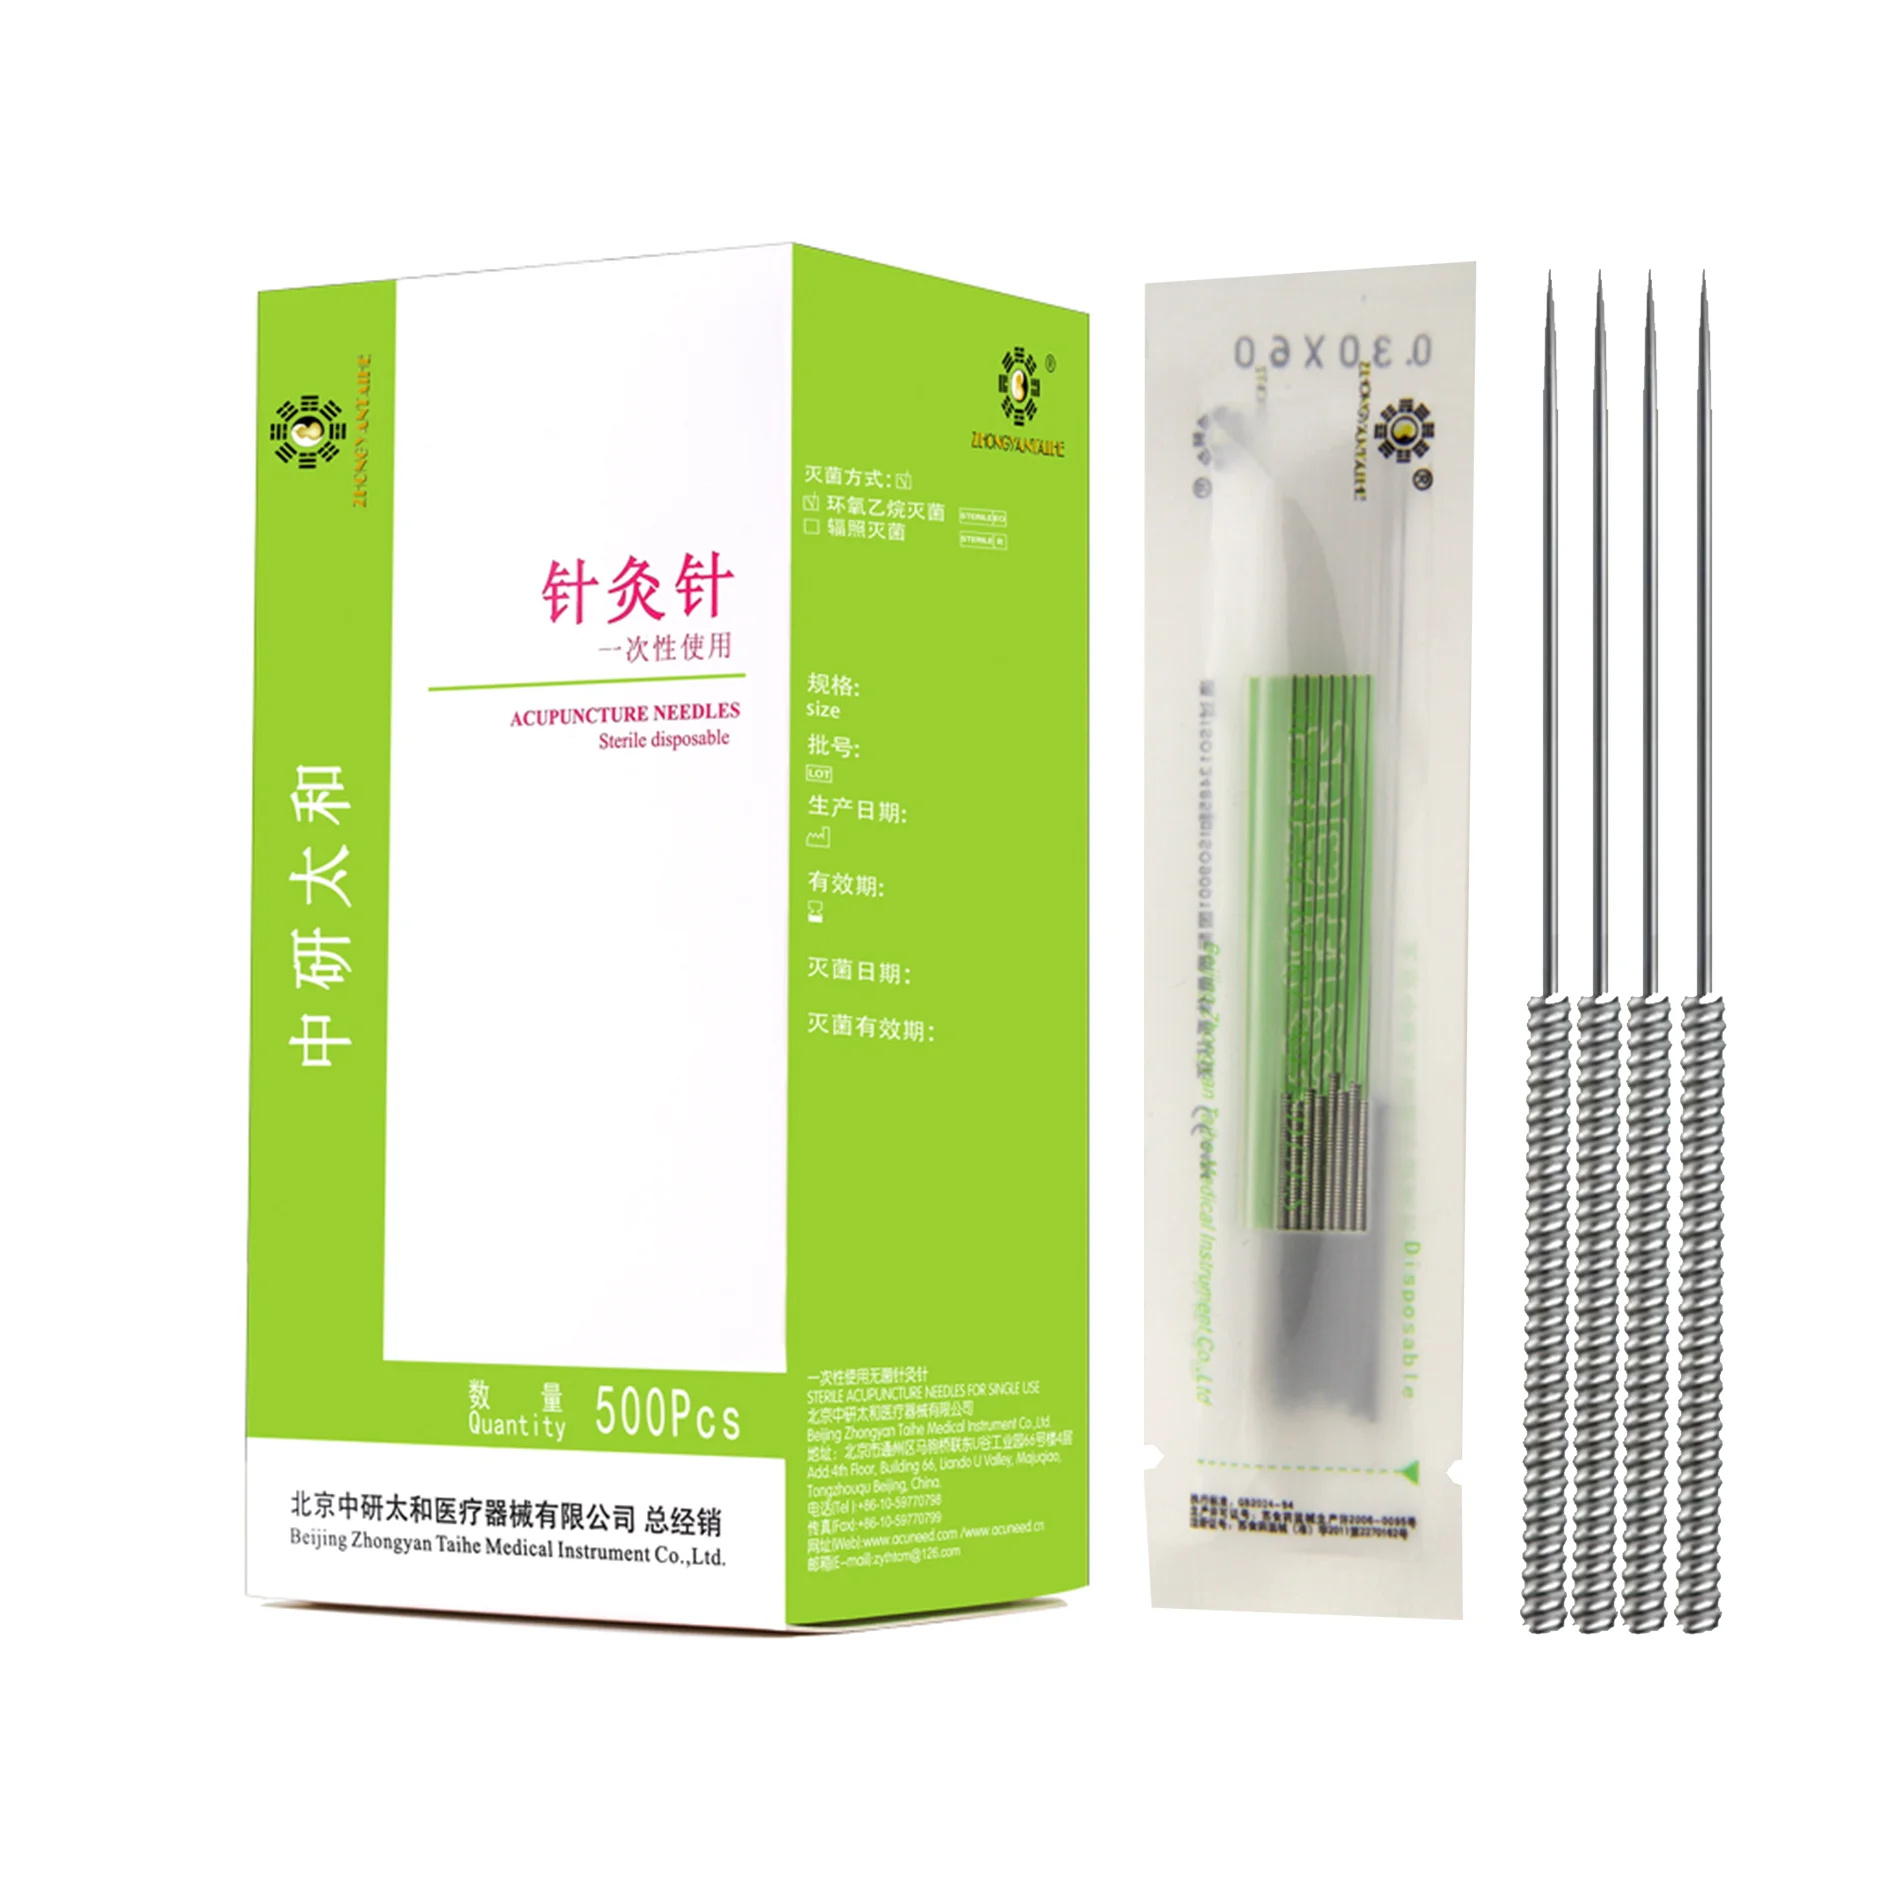 

zhongyan 500pcs Painless Disposable acupuncture needles Stainless Steel Handle